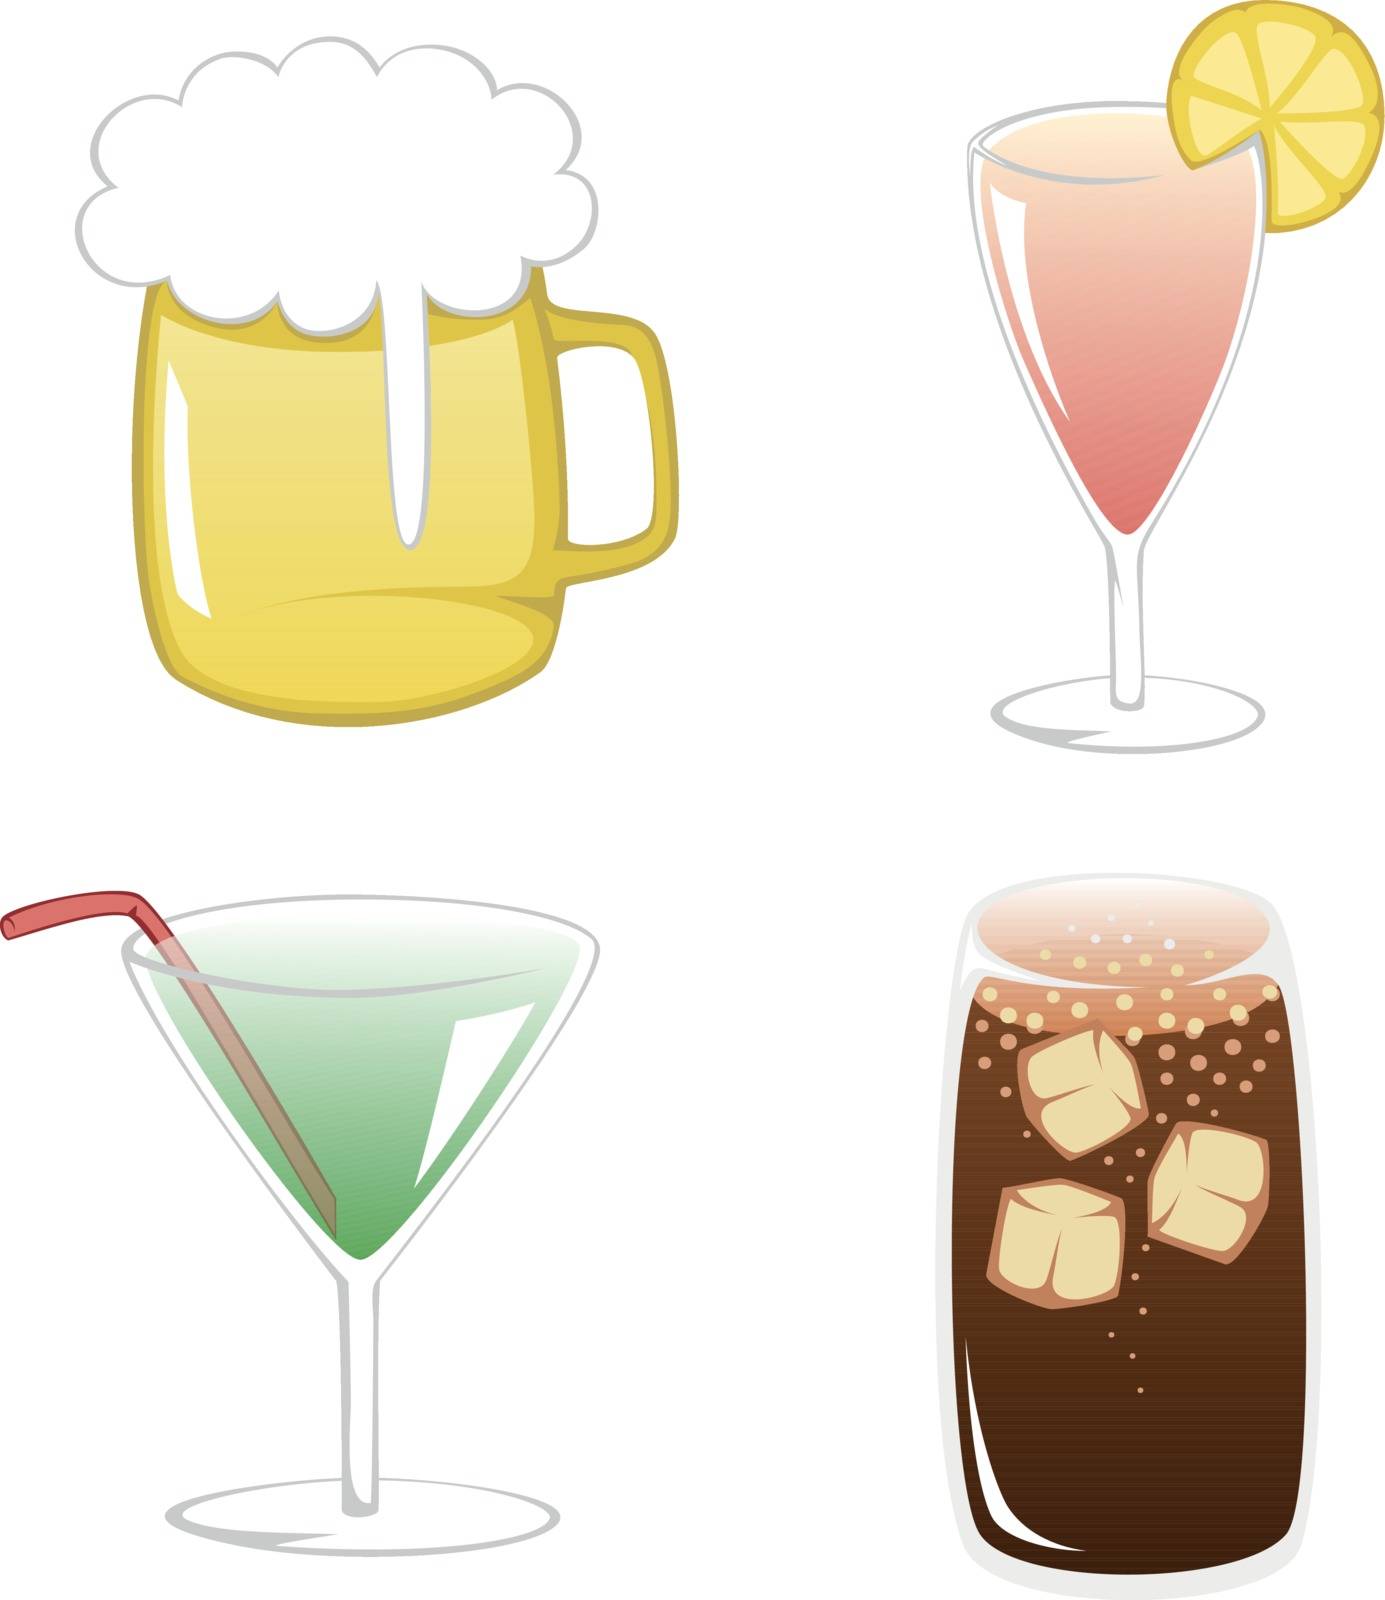 Simple flat illustration of three colorful and popular summertime drinks - beer, cocktails and coke with ice